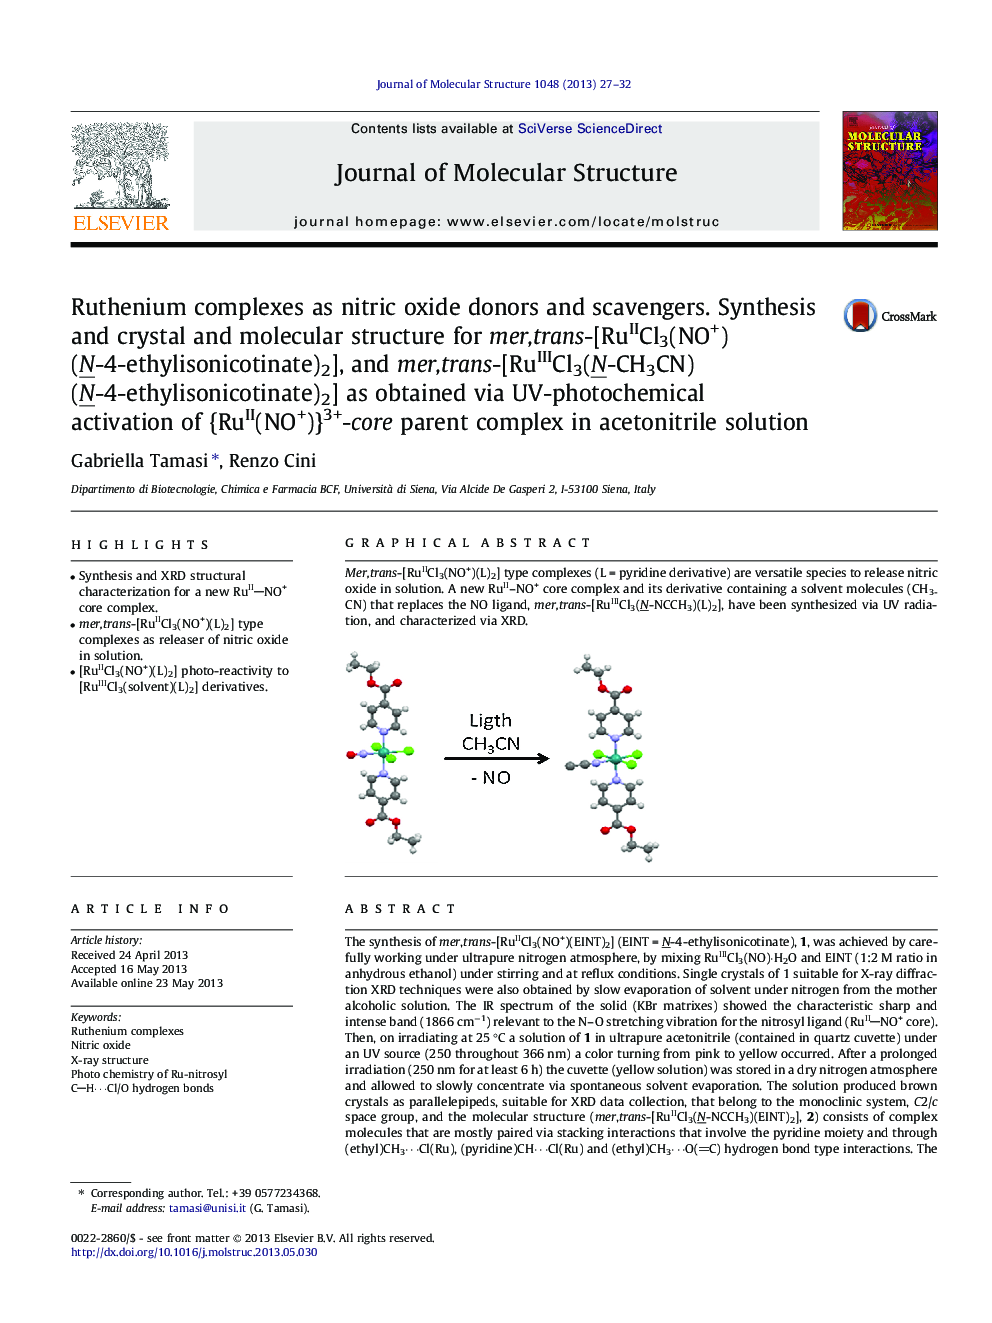 Ruthenium complexes as nitric oxide donors and scavengers. Synthesis and crystal and molecular structure for mer,trans-[RuIICl3(NO+)(N-4-ethylisonicotinate)2], and mer,trans-[RuIIICl3(N-CH3CN)(N-4-ethylisonicotinate)2] as obtained via UV-photochemical act